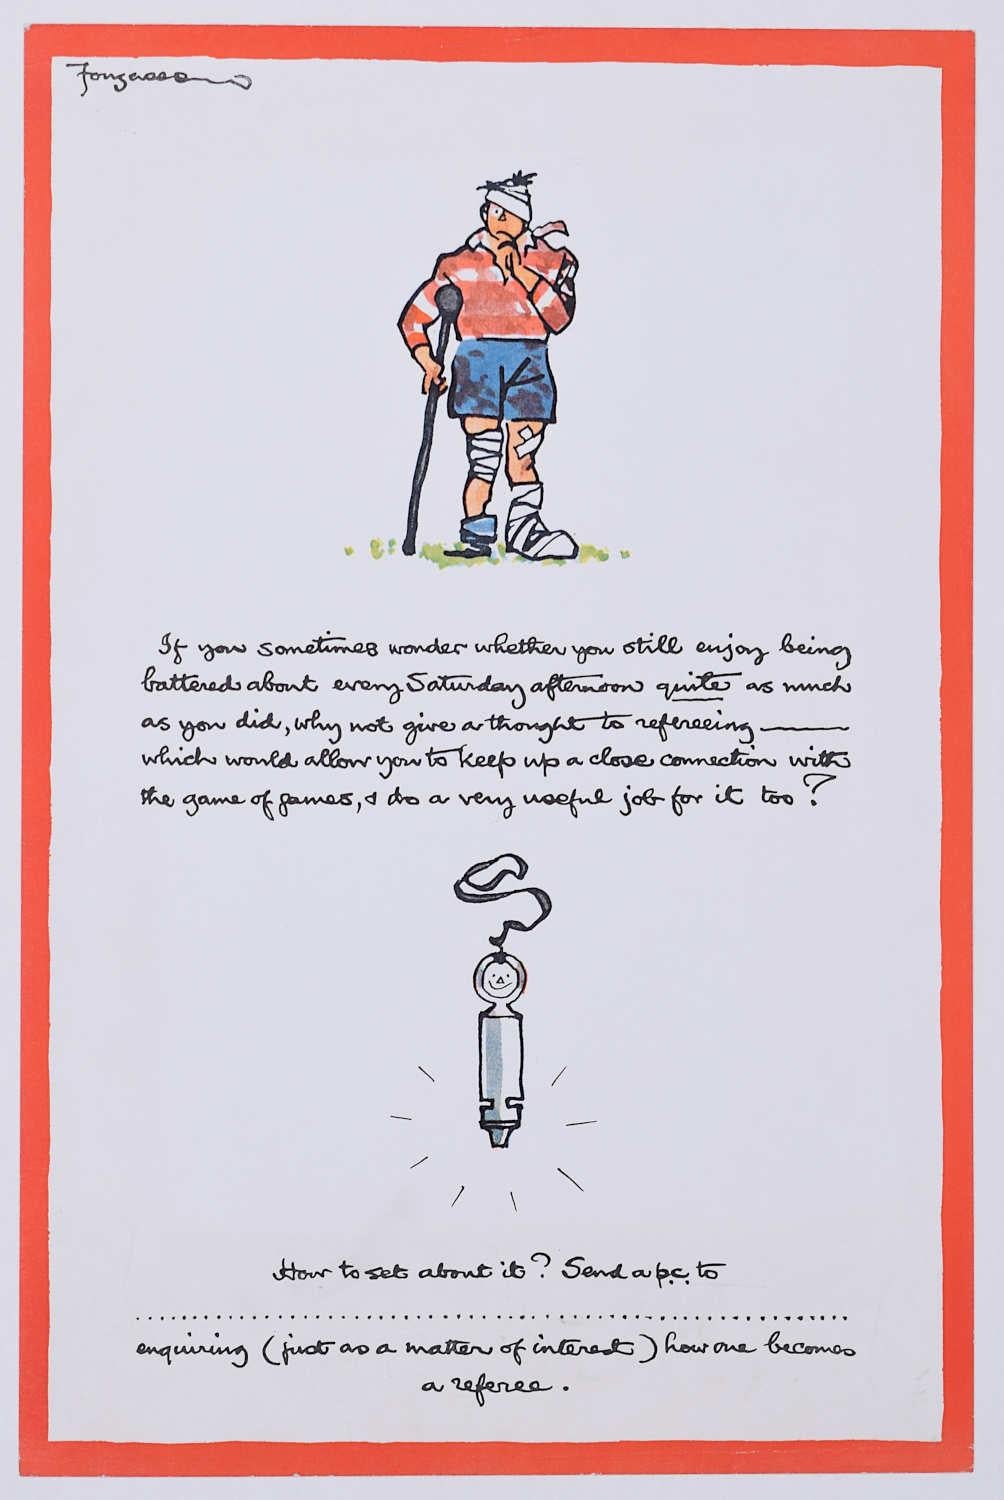 'Fougasse' Rugby Referees Cyril Kenneth Bird original poster